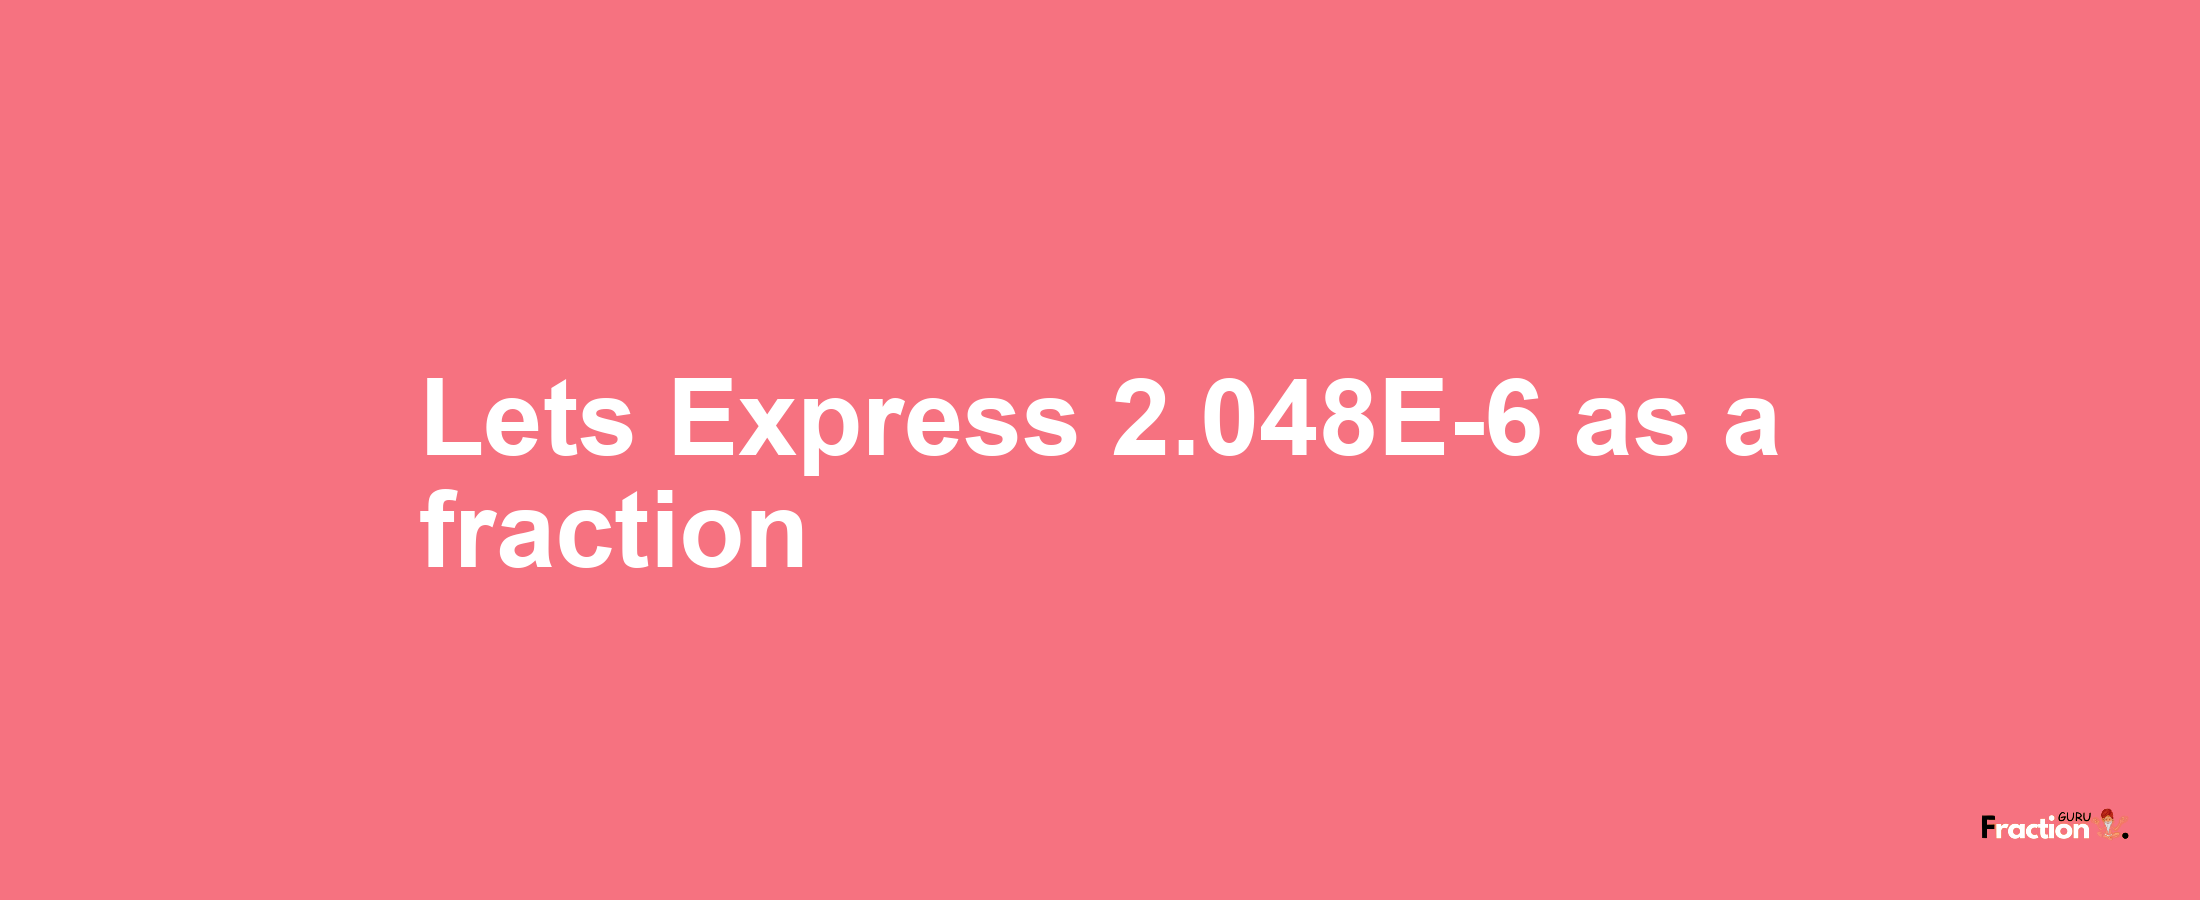 Lets Express 2.048E-6 as afraction